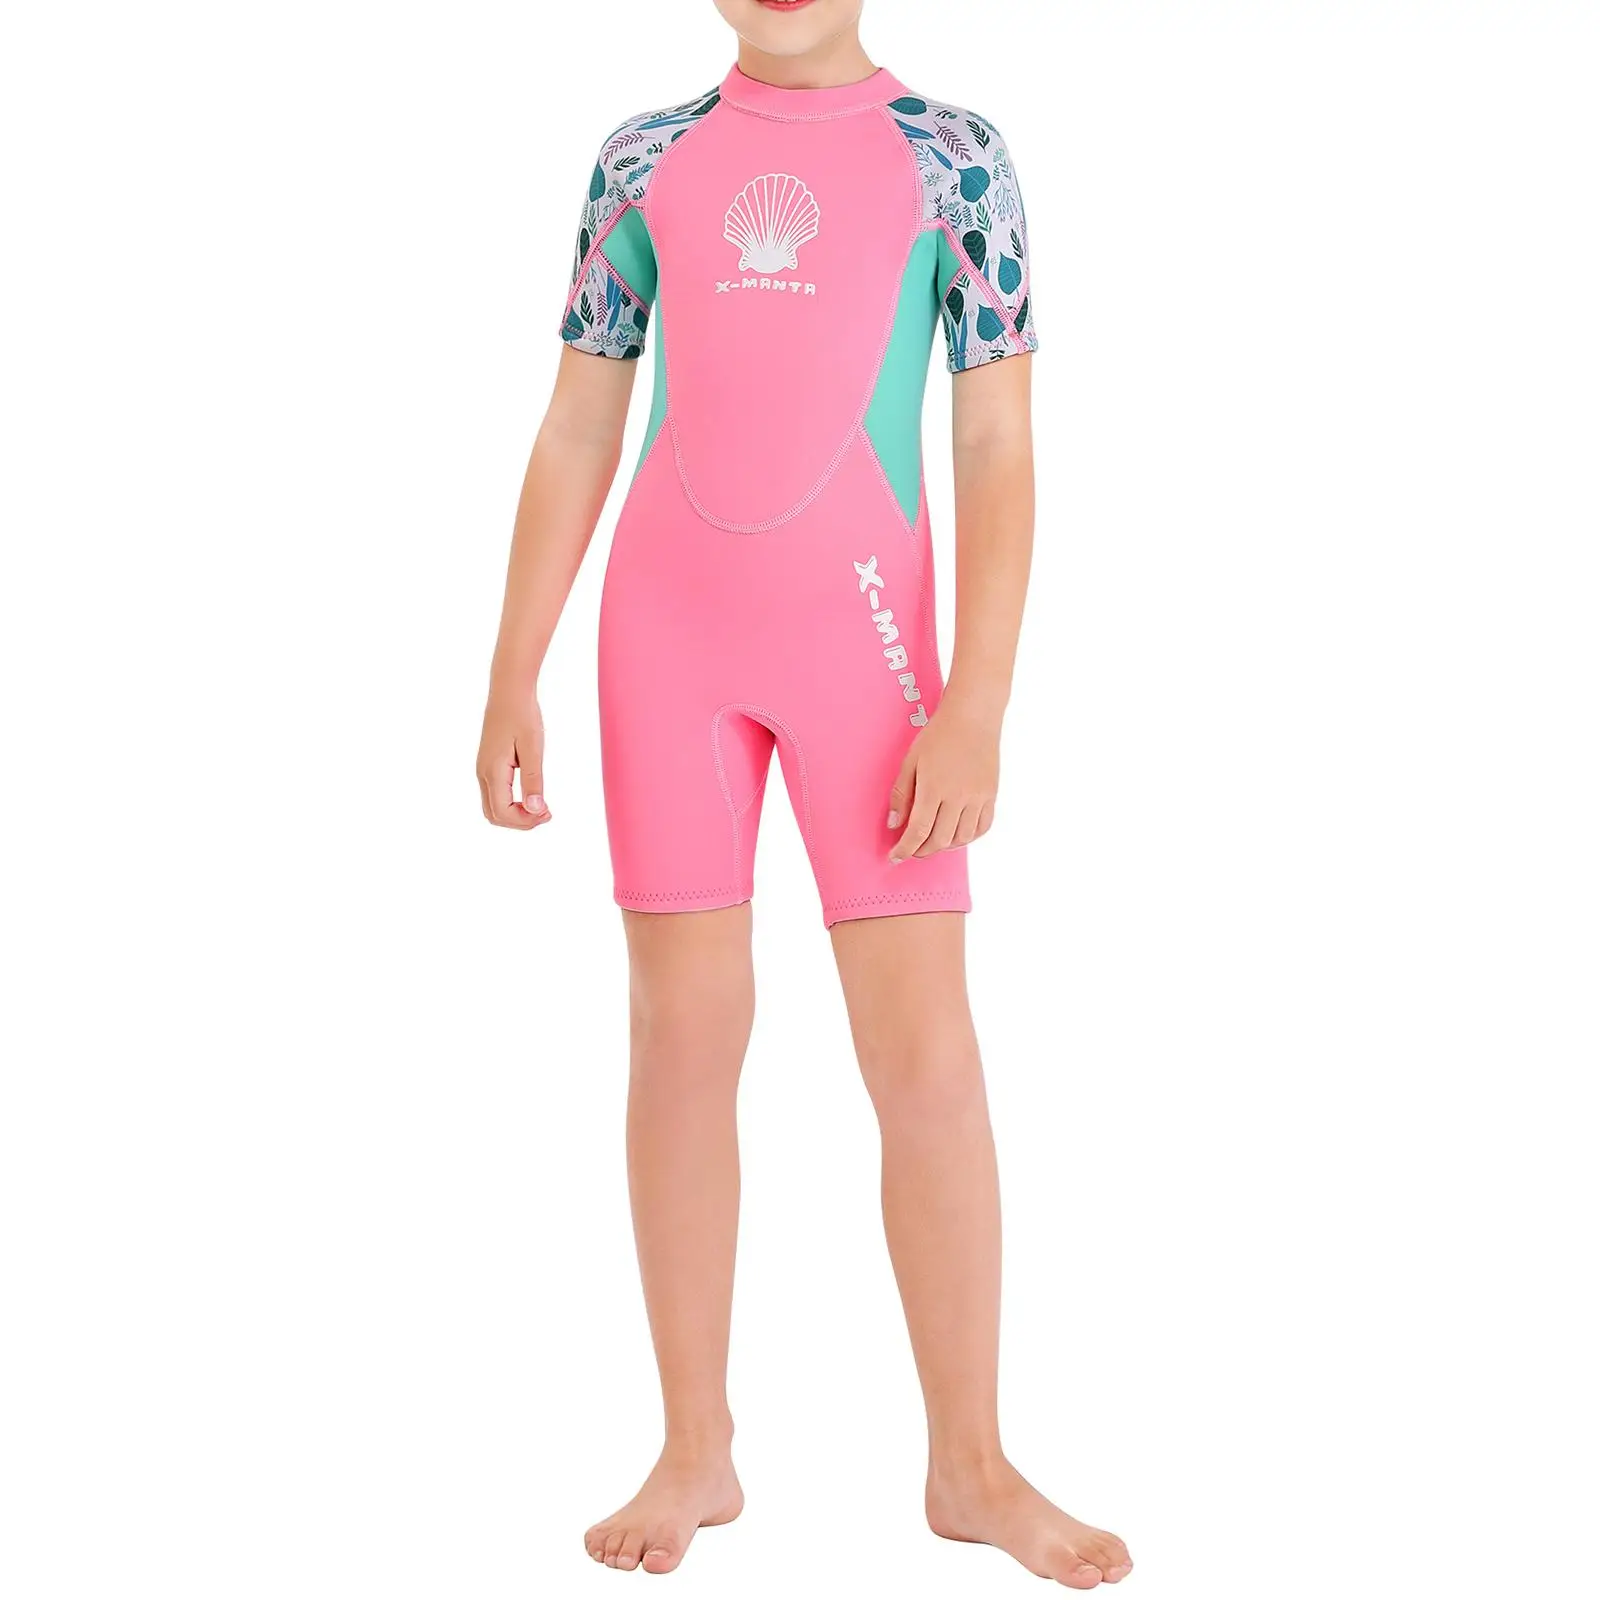 Kid Wetsuit Swimming Costume Scuba Snorkeling Shorty Childrens Wetsuit